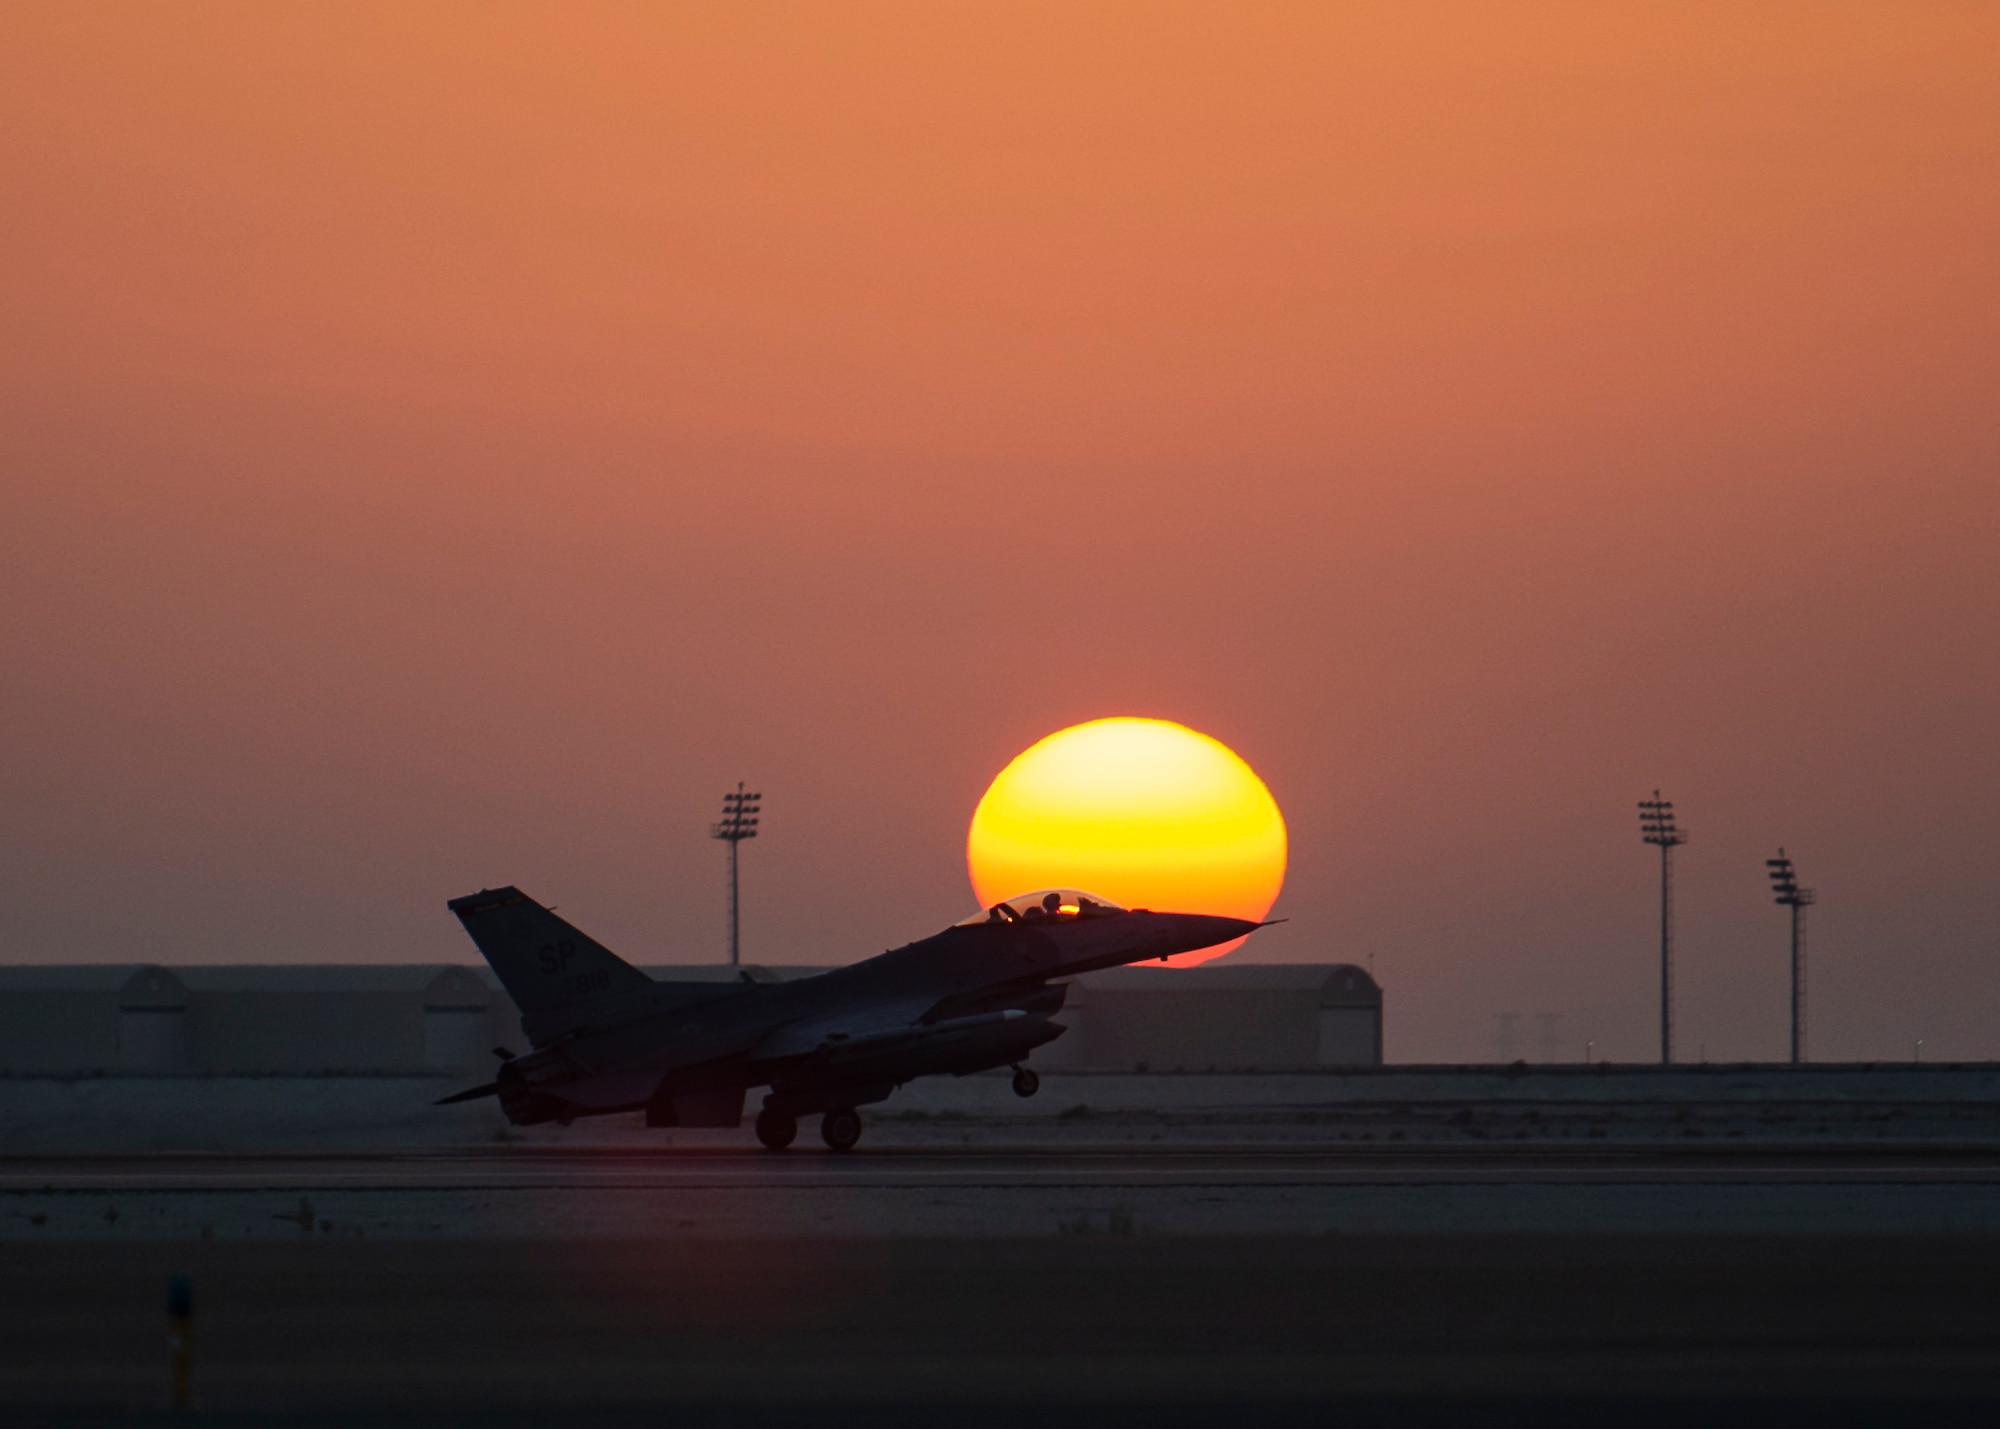 A U.S. Air Force F-16 Fighting Falcon assigned to the 480th Expeditionary Fighter Squadron lands at Al Dhafra Air Base, United Arab Emirates, Dec. 2, 2020. The F-16 is highly maneuverable in air-to-air combat and air-to-surface attack while providing a low-cost, high-performance weapon system for the U.S. and allied nations. (U.S. Air Force photo by Senior Airman Bryan Guthrie)